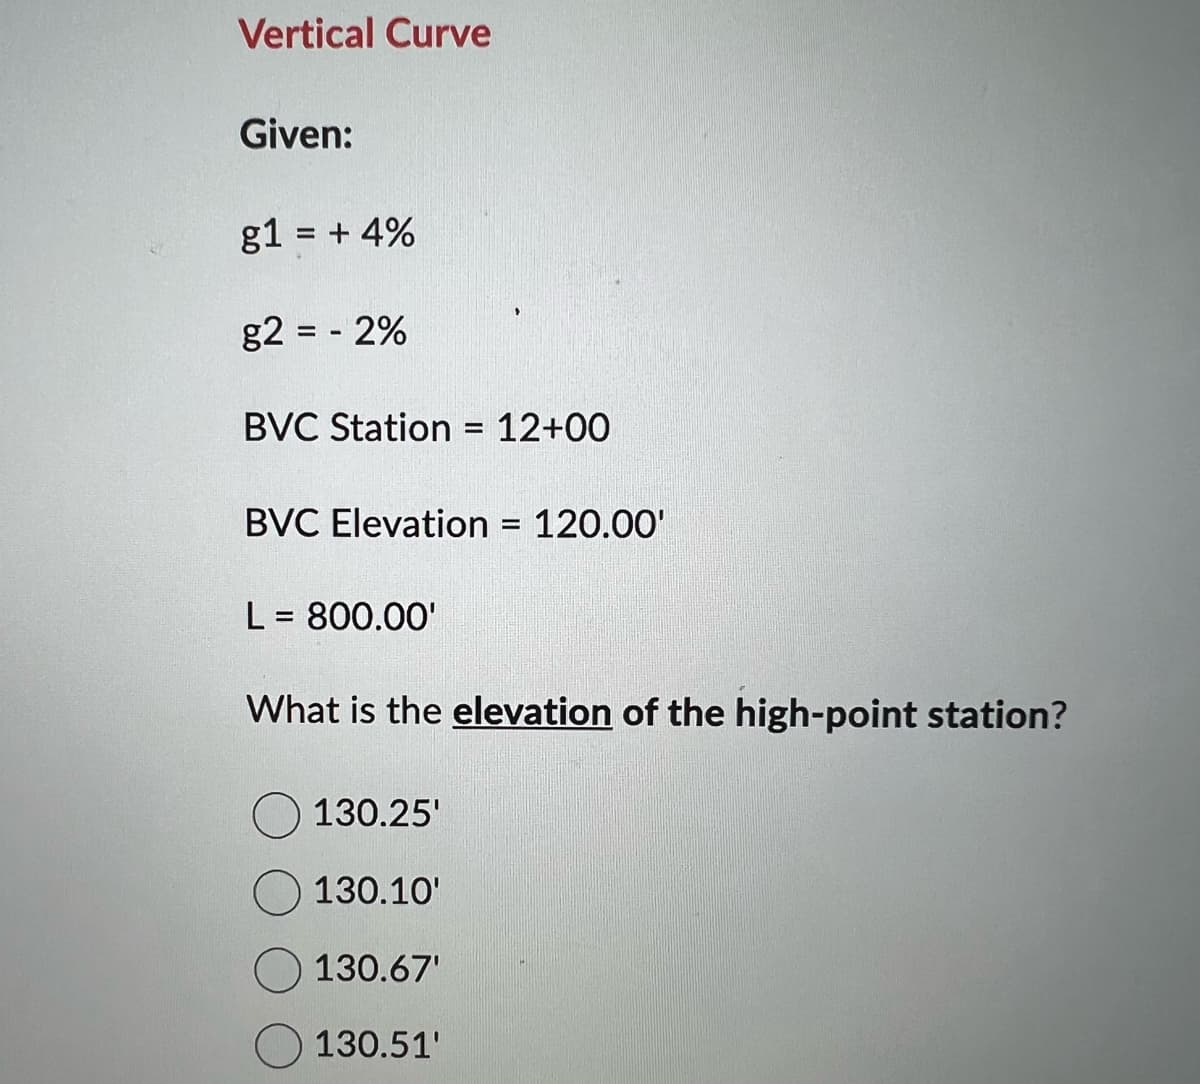 Vertical Curve
Given:
g1 = +4%
g2 = -2%
BVC Station = 12+00
BVC Elevation = 120.00'
L = 800.00'
What is the elevation of the high-point station?
130.25'
130.10'
130.67'
130.51'